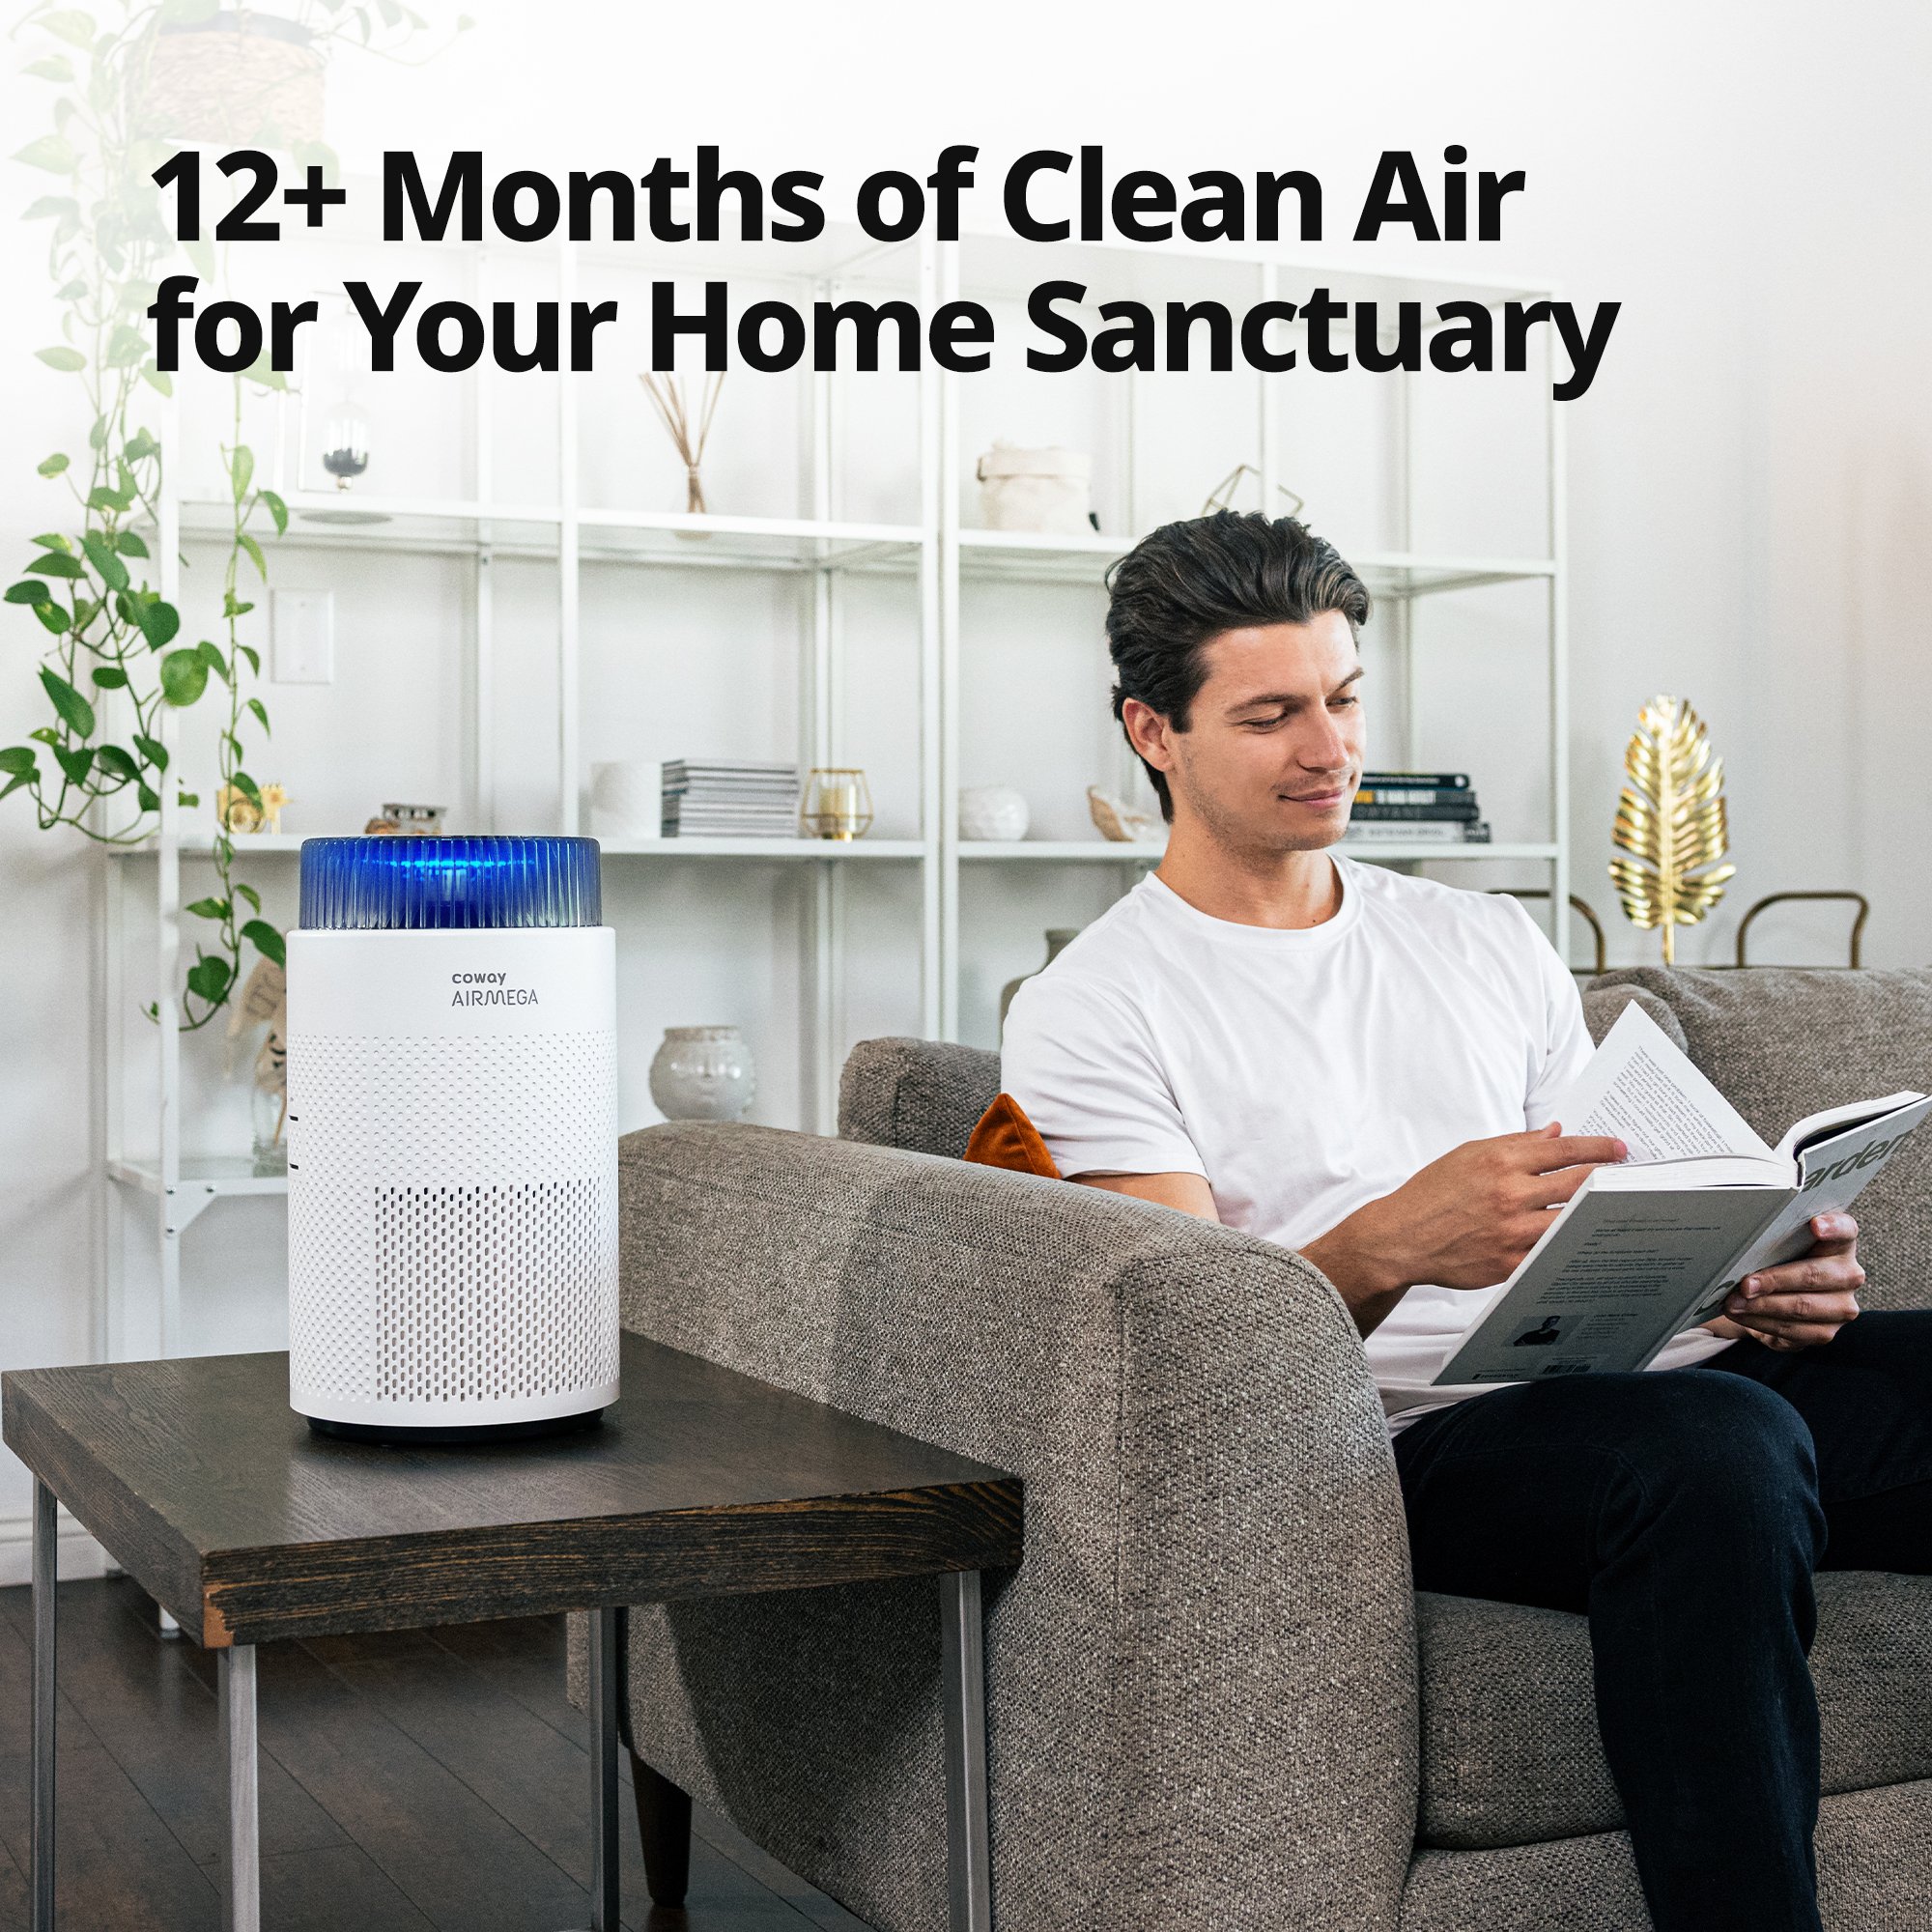 12+ Months of Clean Air for Your Home Sanctuary